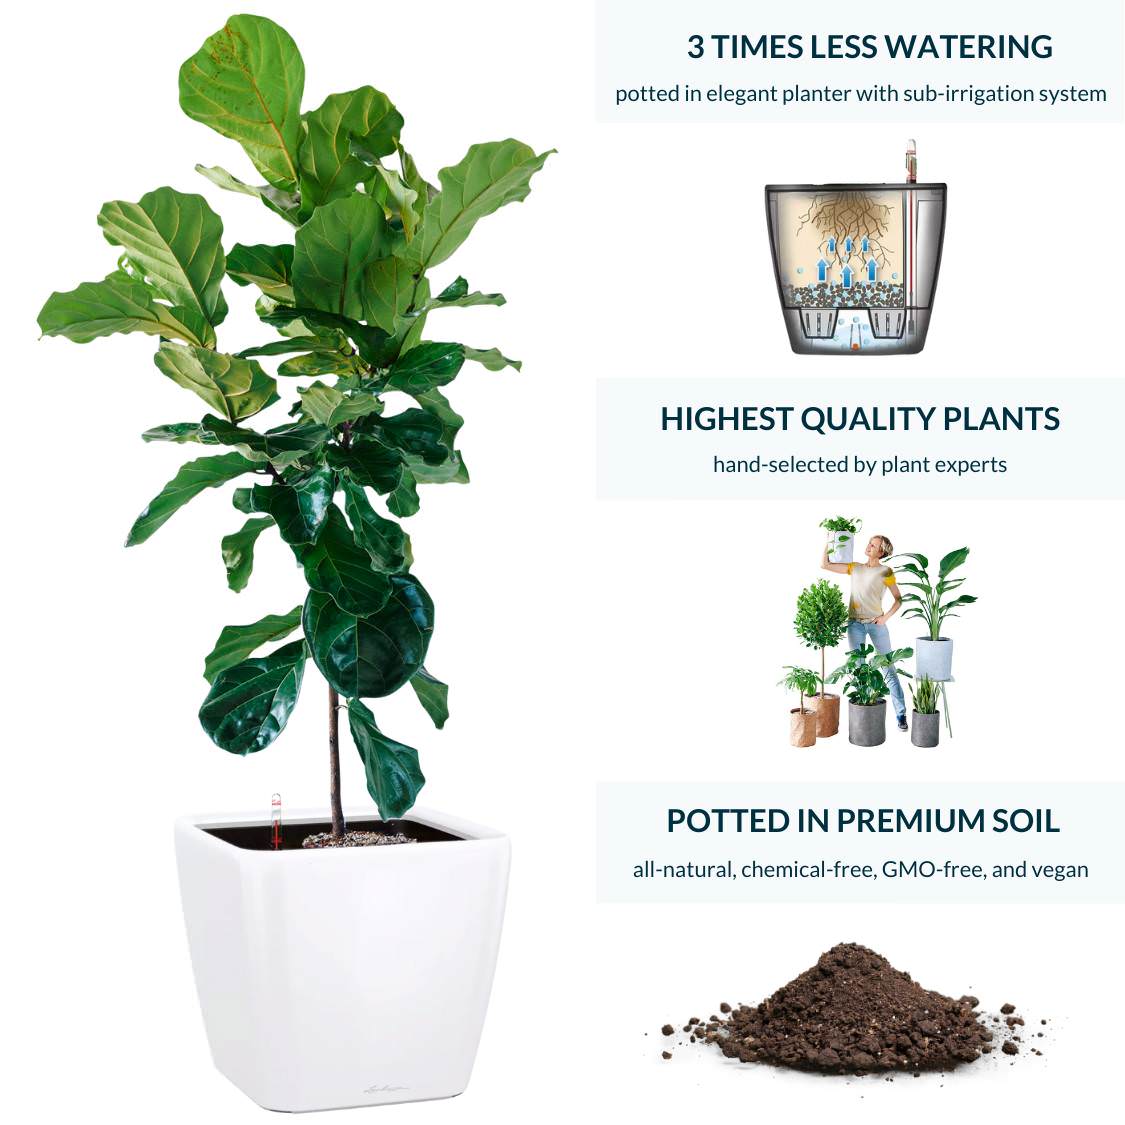 Fiddle Leaf Fig Tree Potted In Lechuza Quadro 50 Planter - White - My City Plants